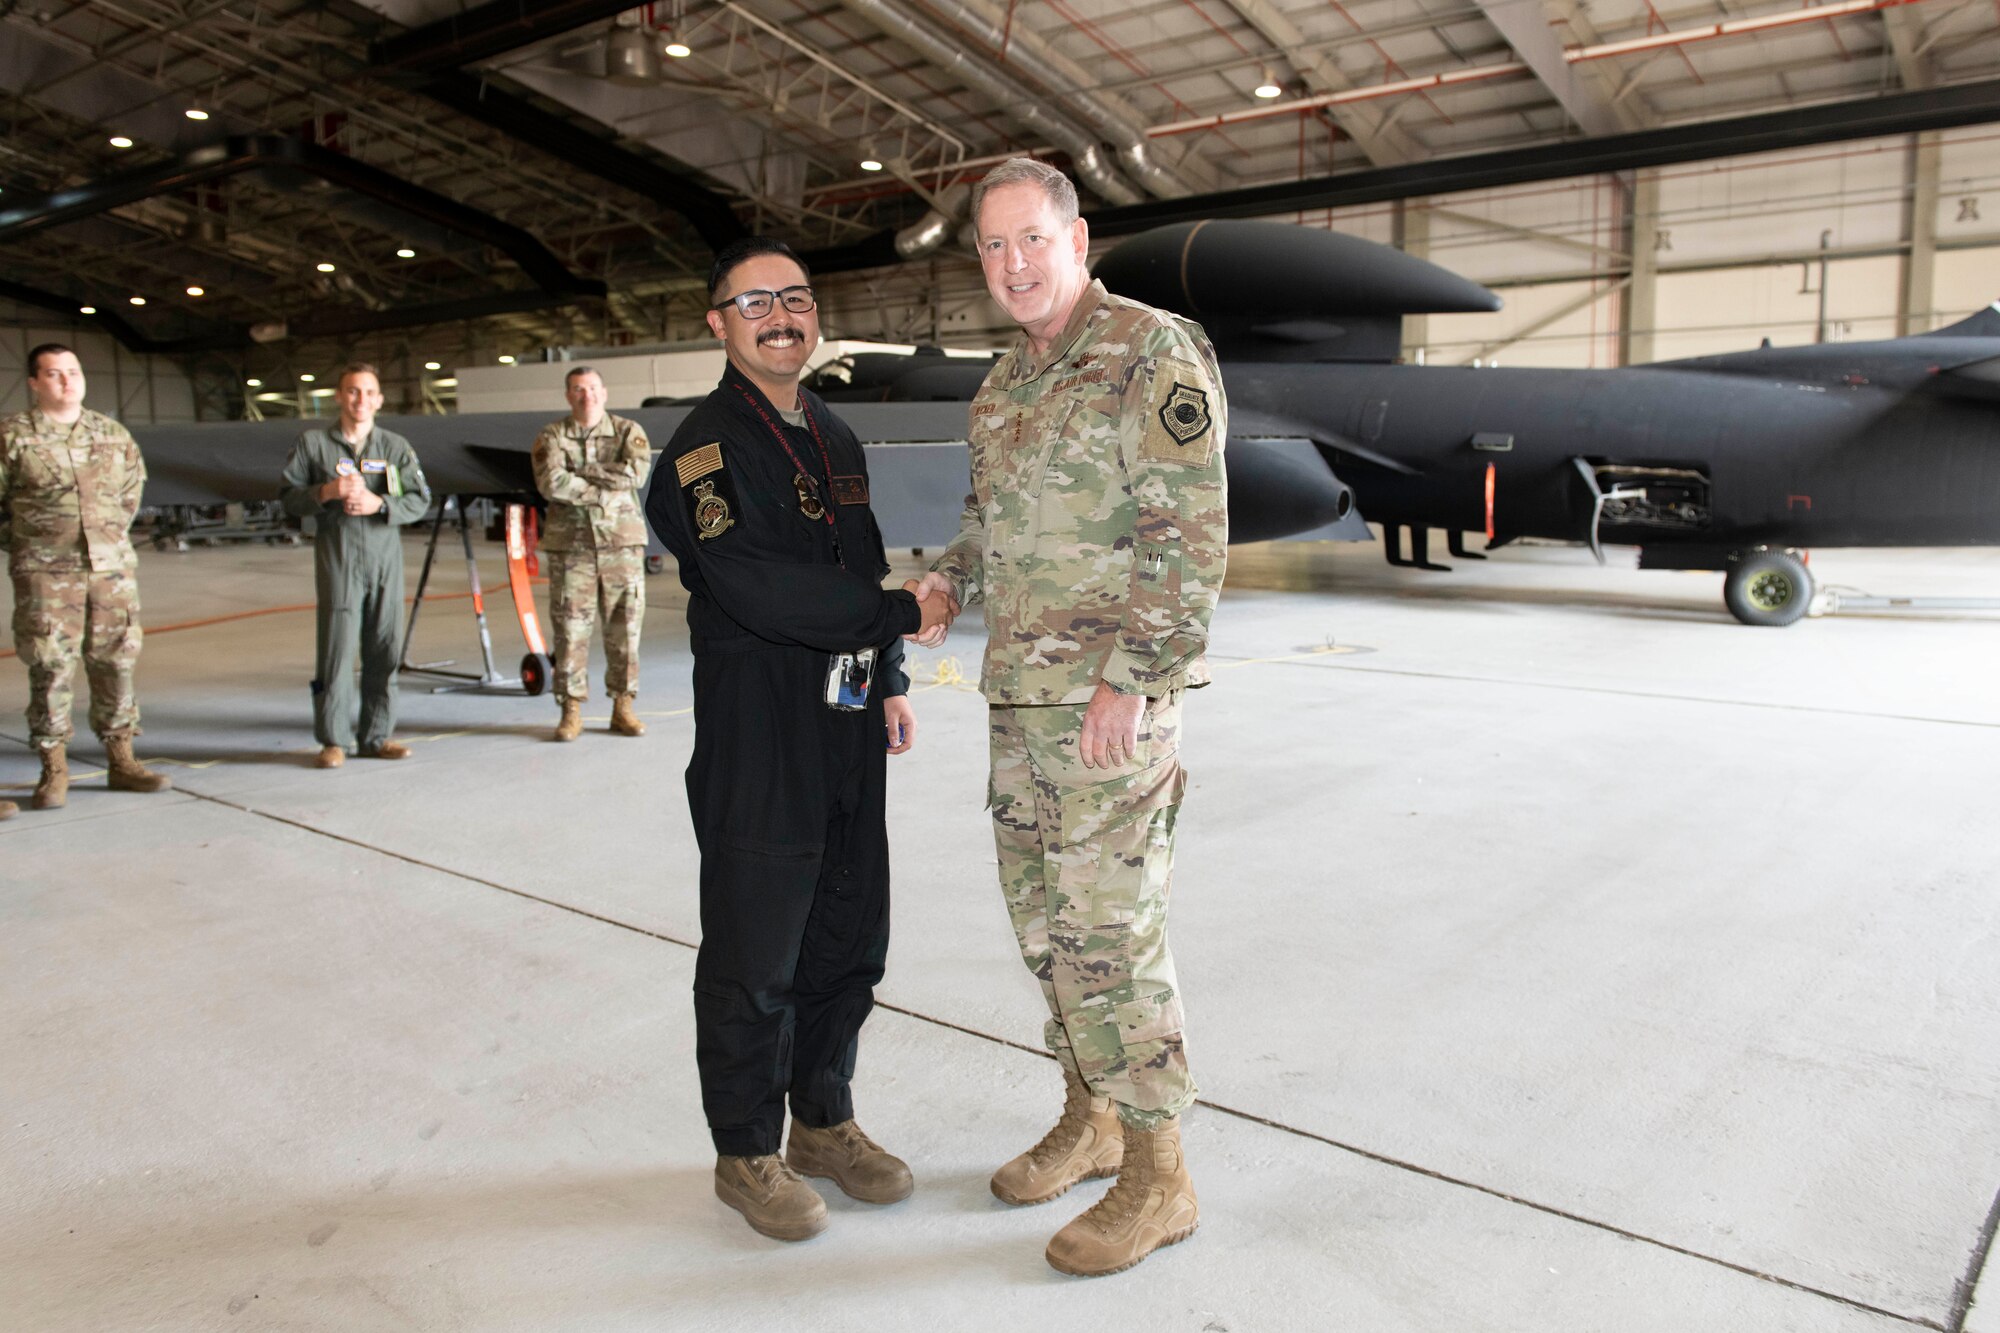 U.S. Air Force Gen. James B. Hecker, right, U.S. Air Forces in Europe and Air Forces Africa commander, recognizes Staff Sgt. Ryan Yamauchi, left, 99th Expeditionary Reconnaissance Squadron U-2 Dragon Lady dedicated crew chief, at Royal Air Force Fairford, England, July, 18, 2022. During his first visit to the 501st Combat Support Wing as the USAFE-AFAFRICA commander, Hecker met with several Airmen and received briefings about the wing’s mission and capabilities. (U.S. Air Force photo by Senior Airman Jennifer Zima)